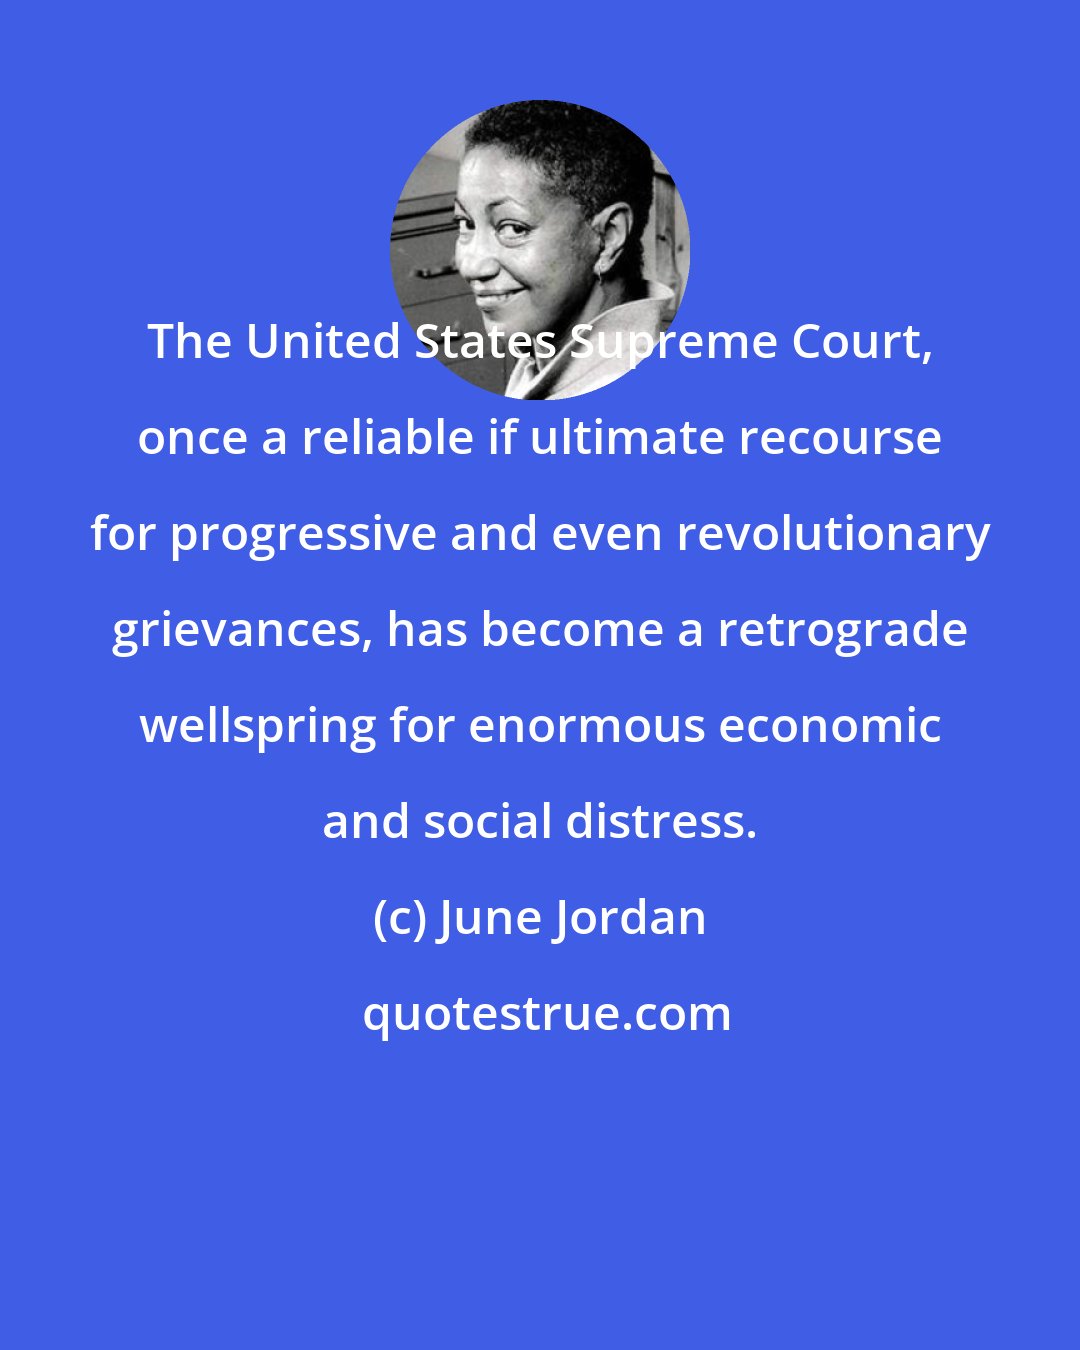 June Jordan: The United States Supreme Court, once a reliable if ultimate recourse for progressive and even revolutionary grievances, has become a retrograde wellspring for enormous economic and social distress.